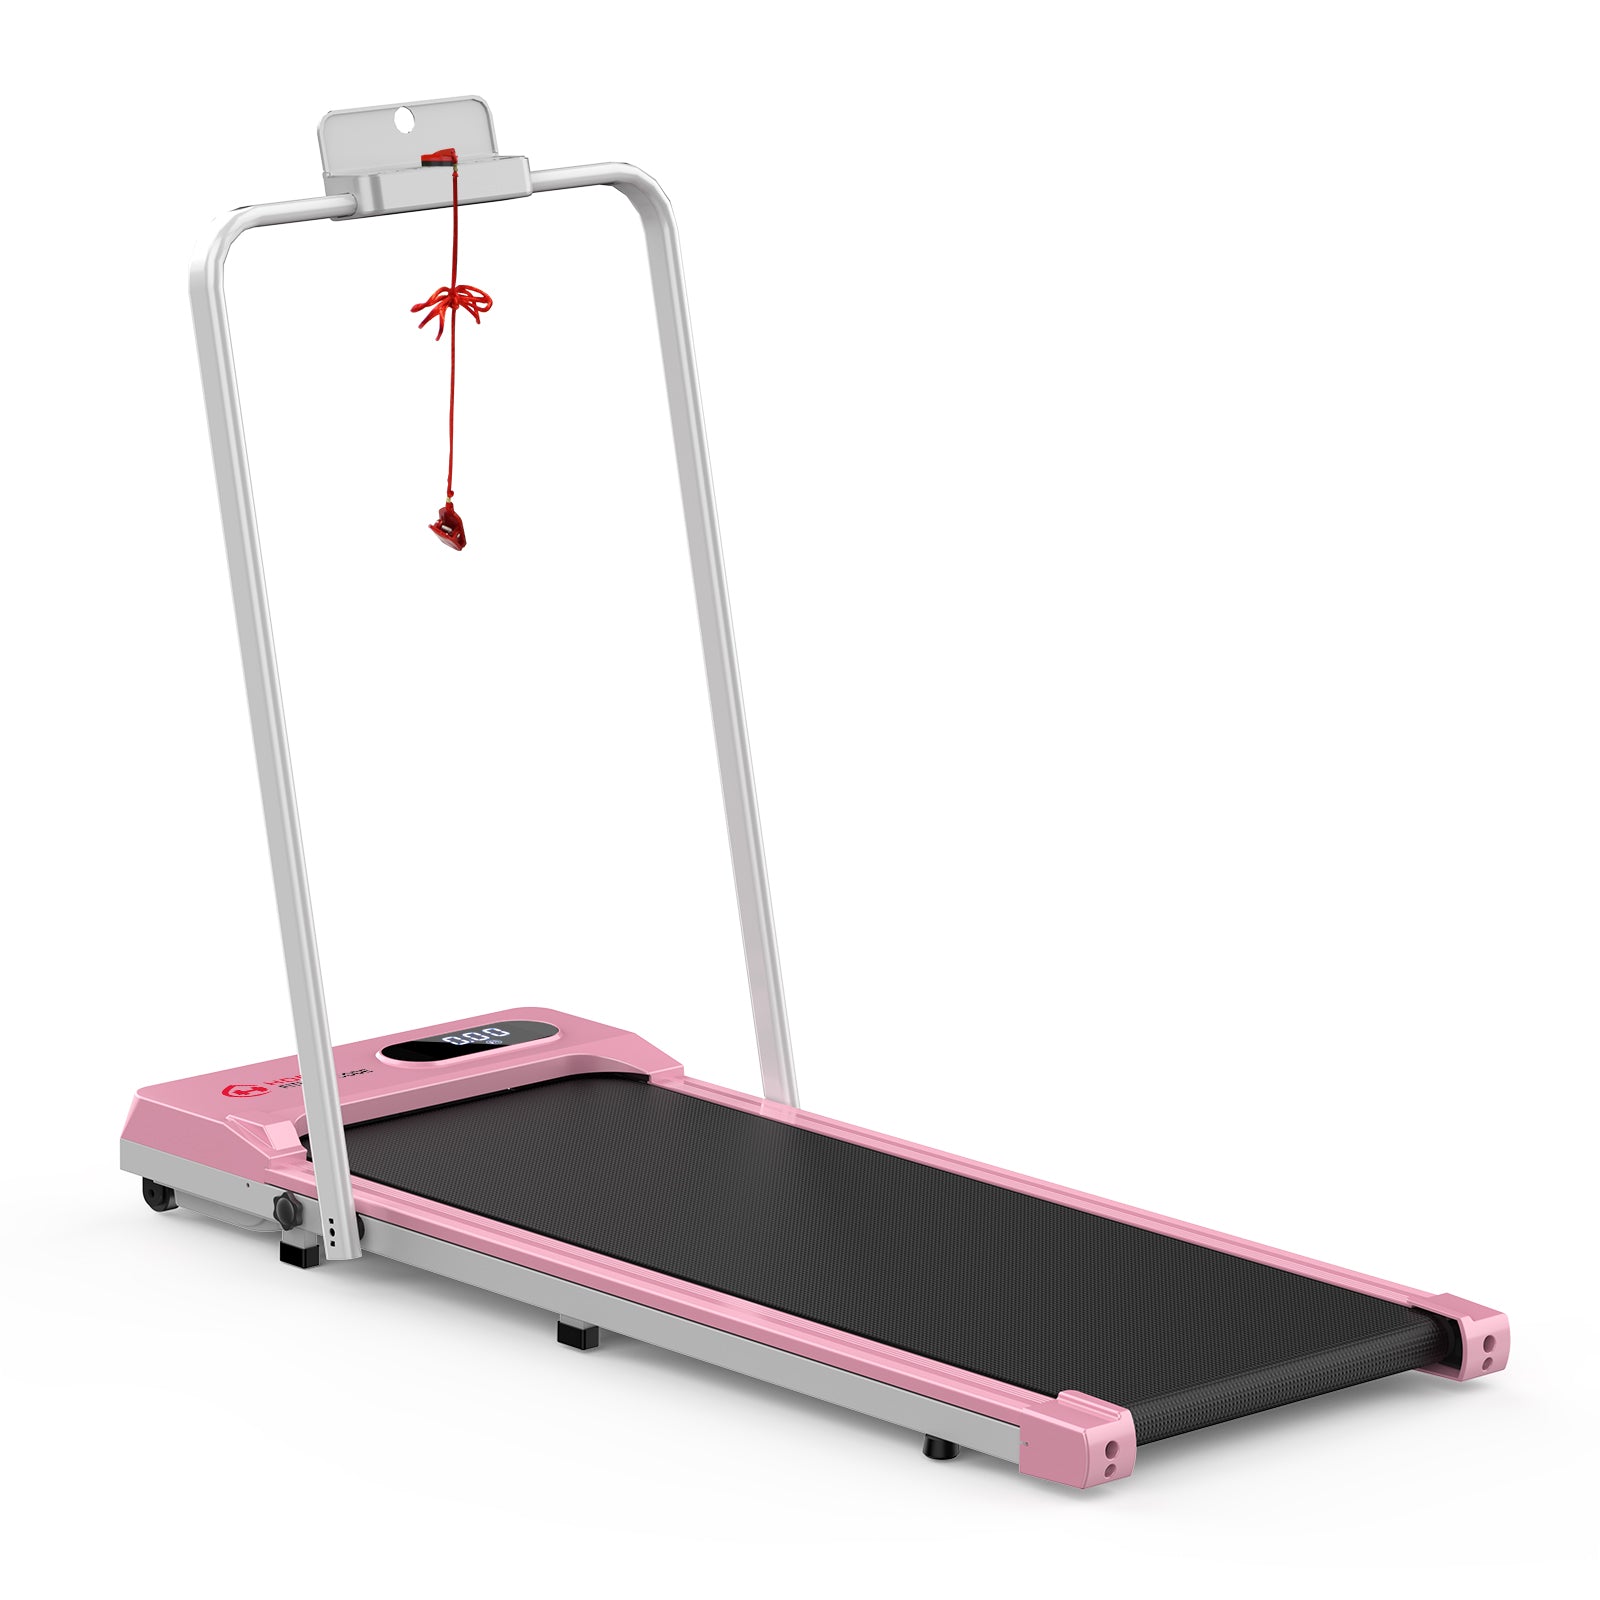 Under Desk Treadmill 1-6KM/H Walking Jogging Machine for Home Office with LED Display With Handrail / Pink